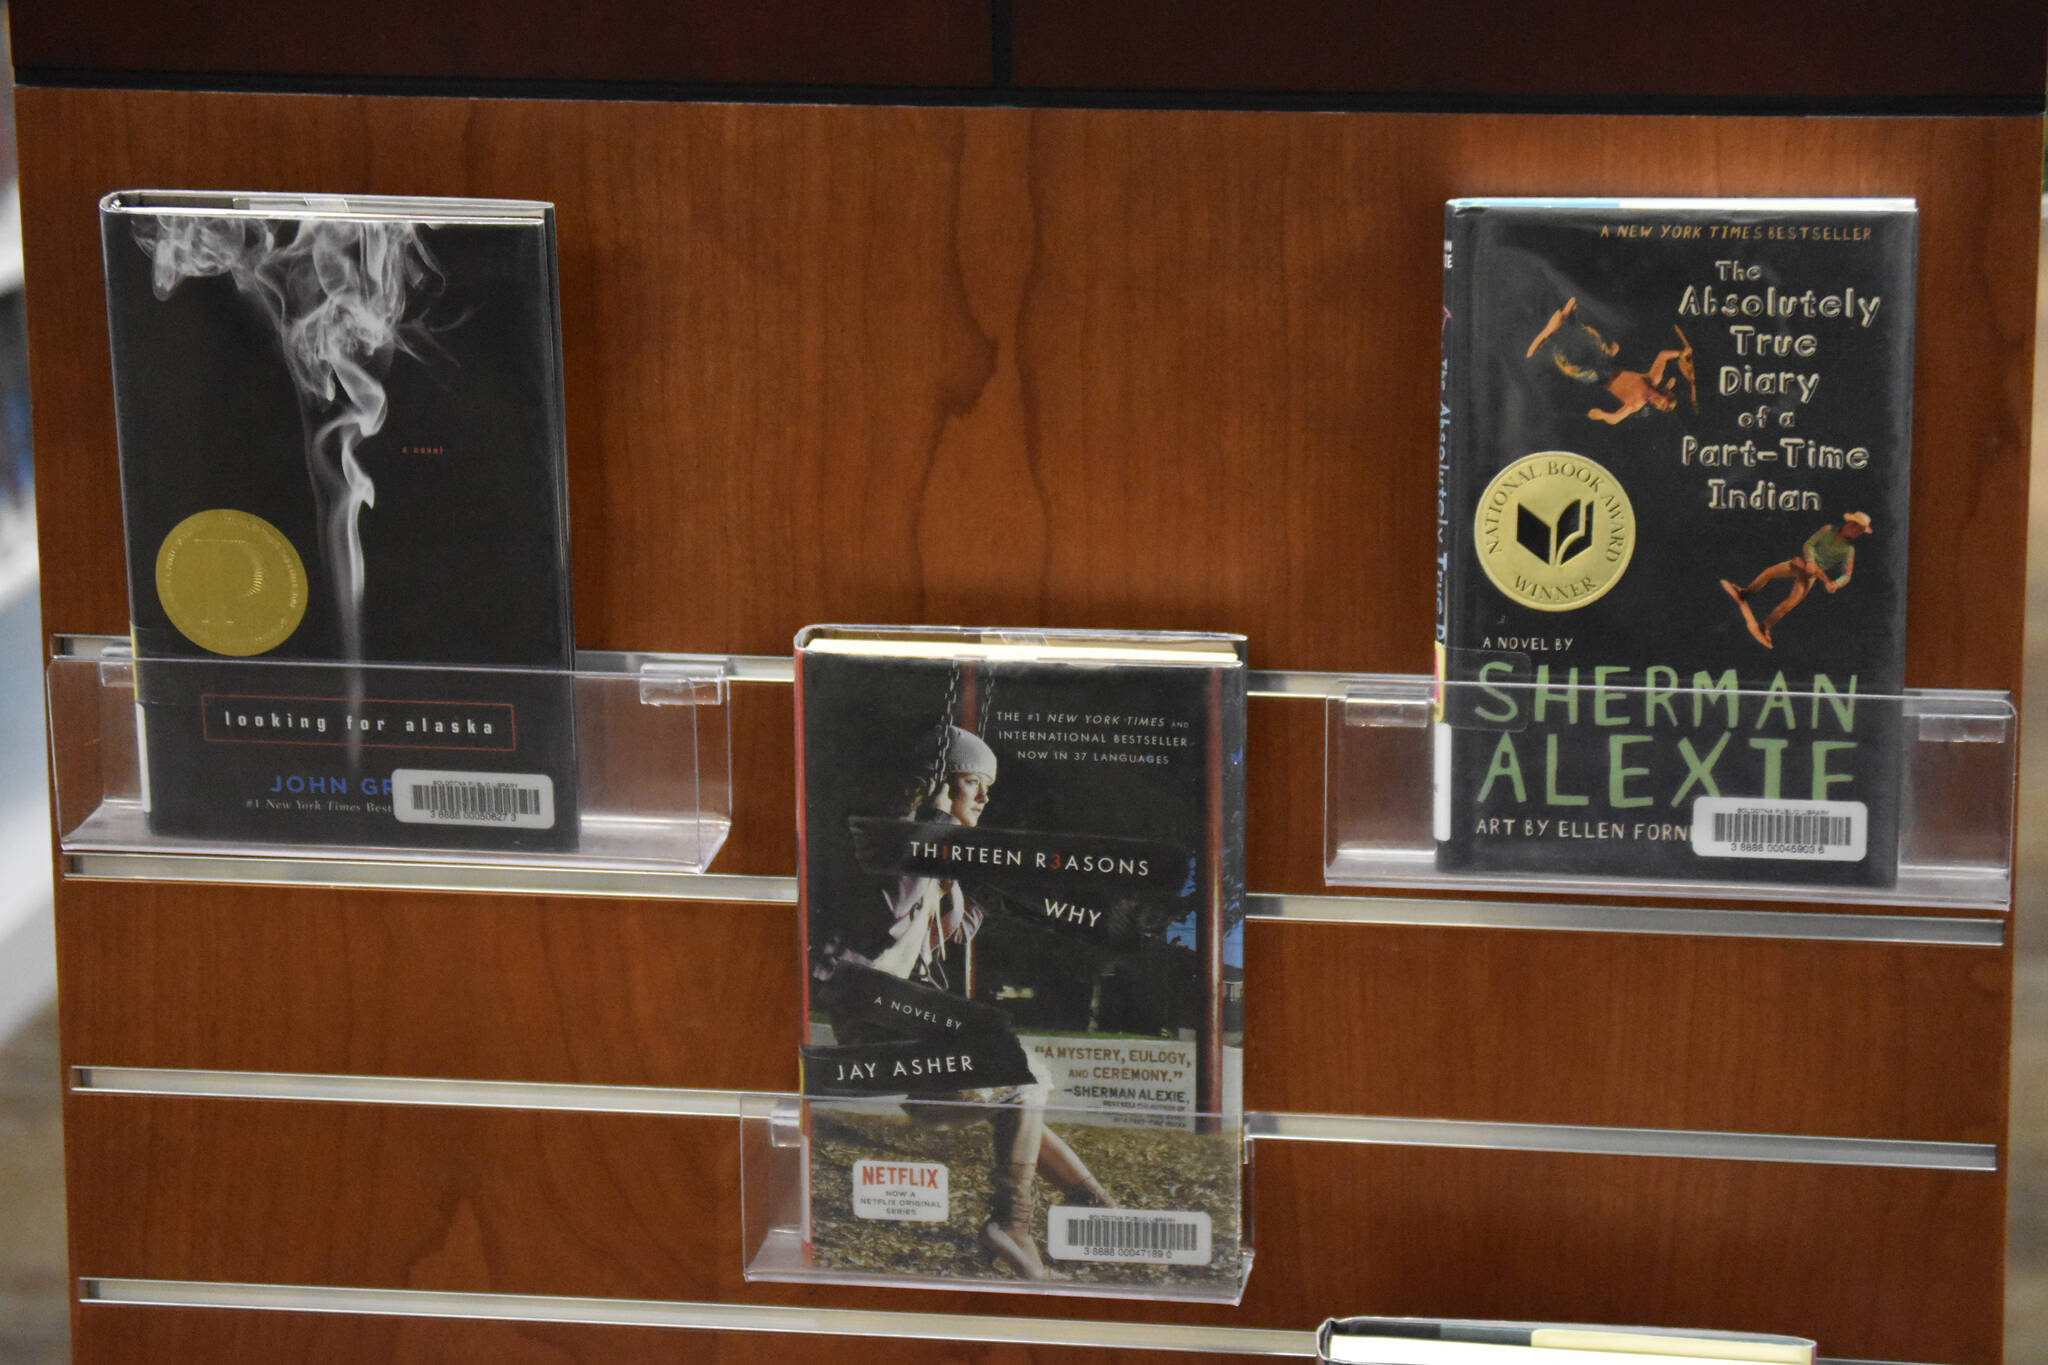 Examples of contemporary books that have been banned or challenged in recent years are displayed on Saturday, Sept. 24, 2022 at the Soldotna Public Library in Soldotna, Alaska. (Jake Dye/Peninsula Clarion)